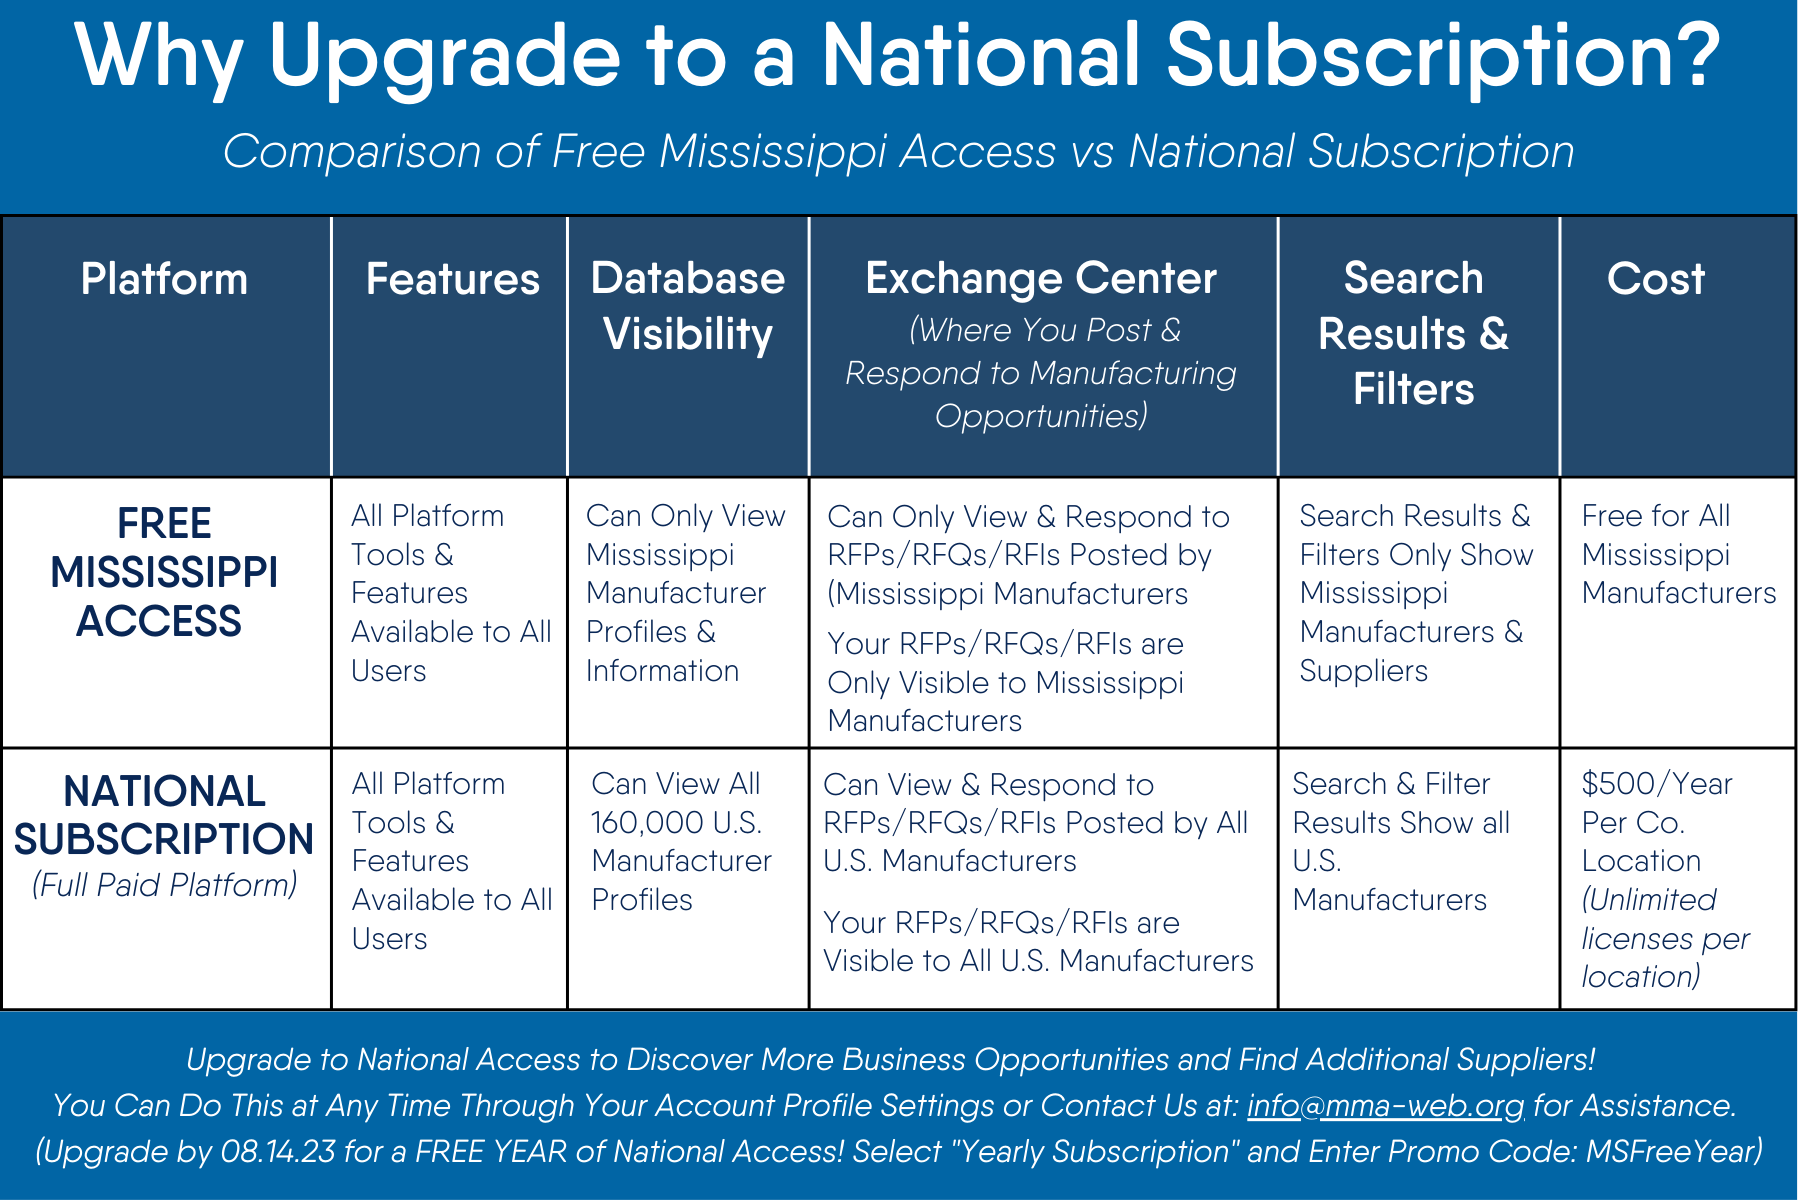 Why Upgrade to a National Subscription